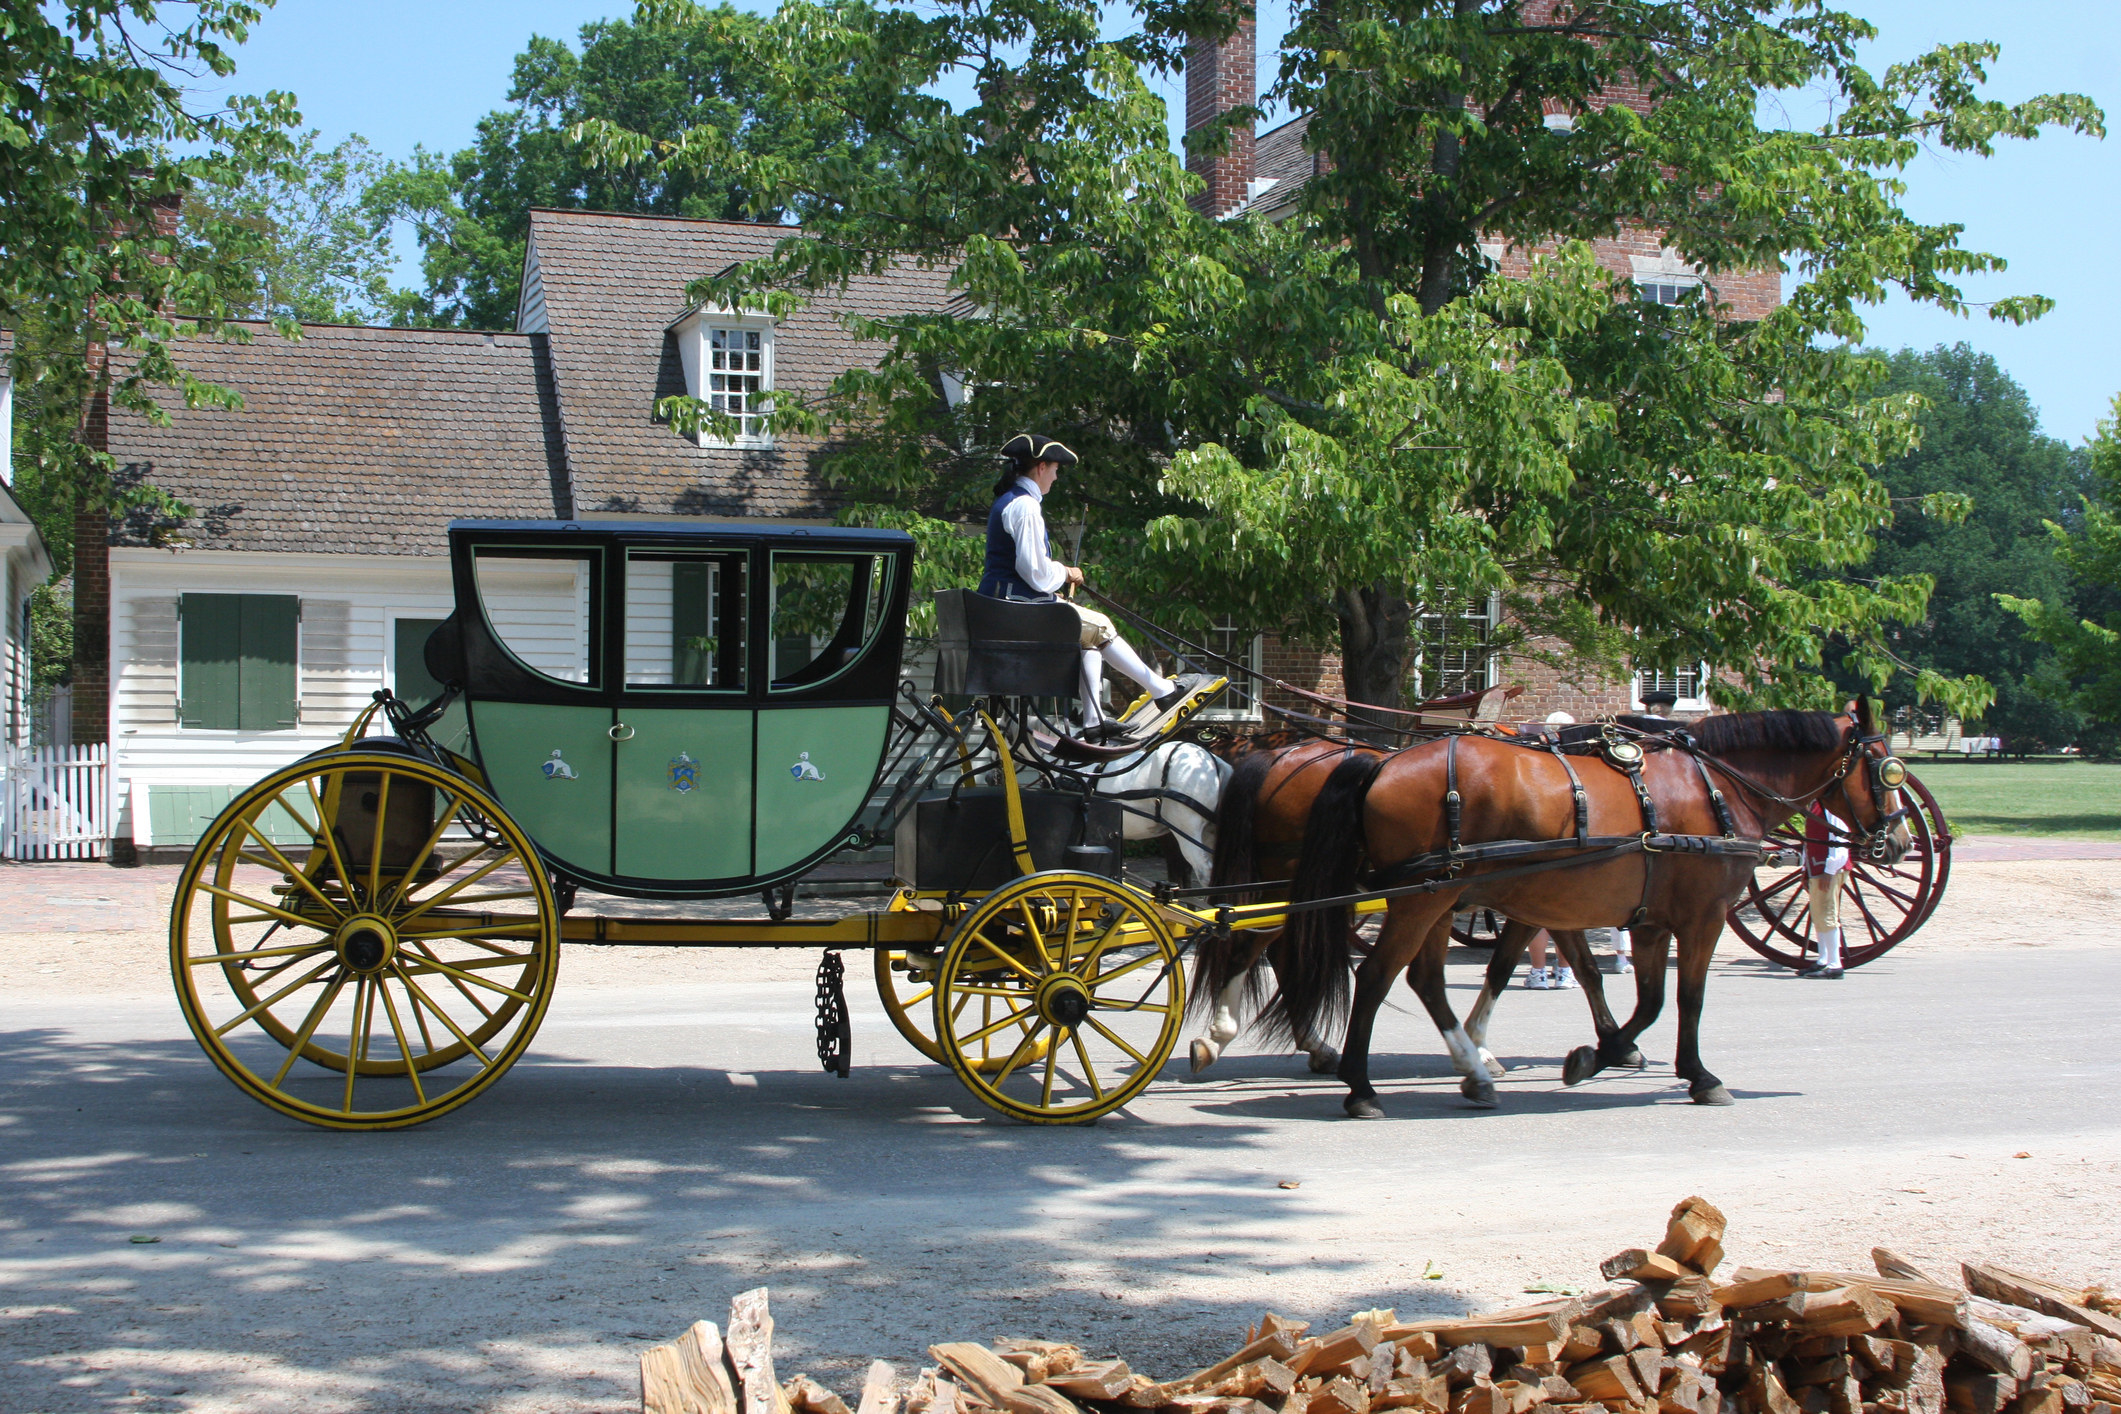 A horse-drawn carriage heads down the street